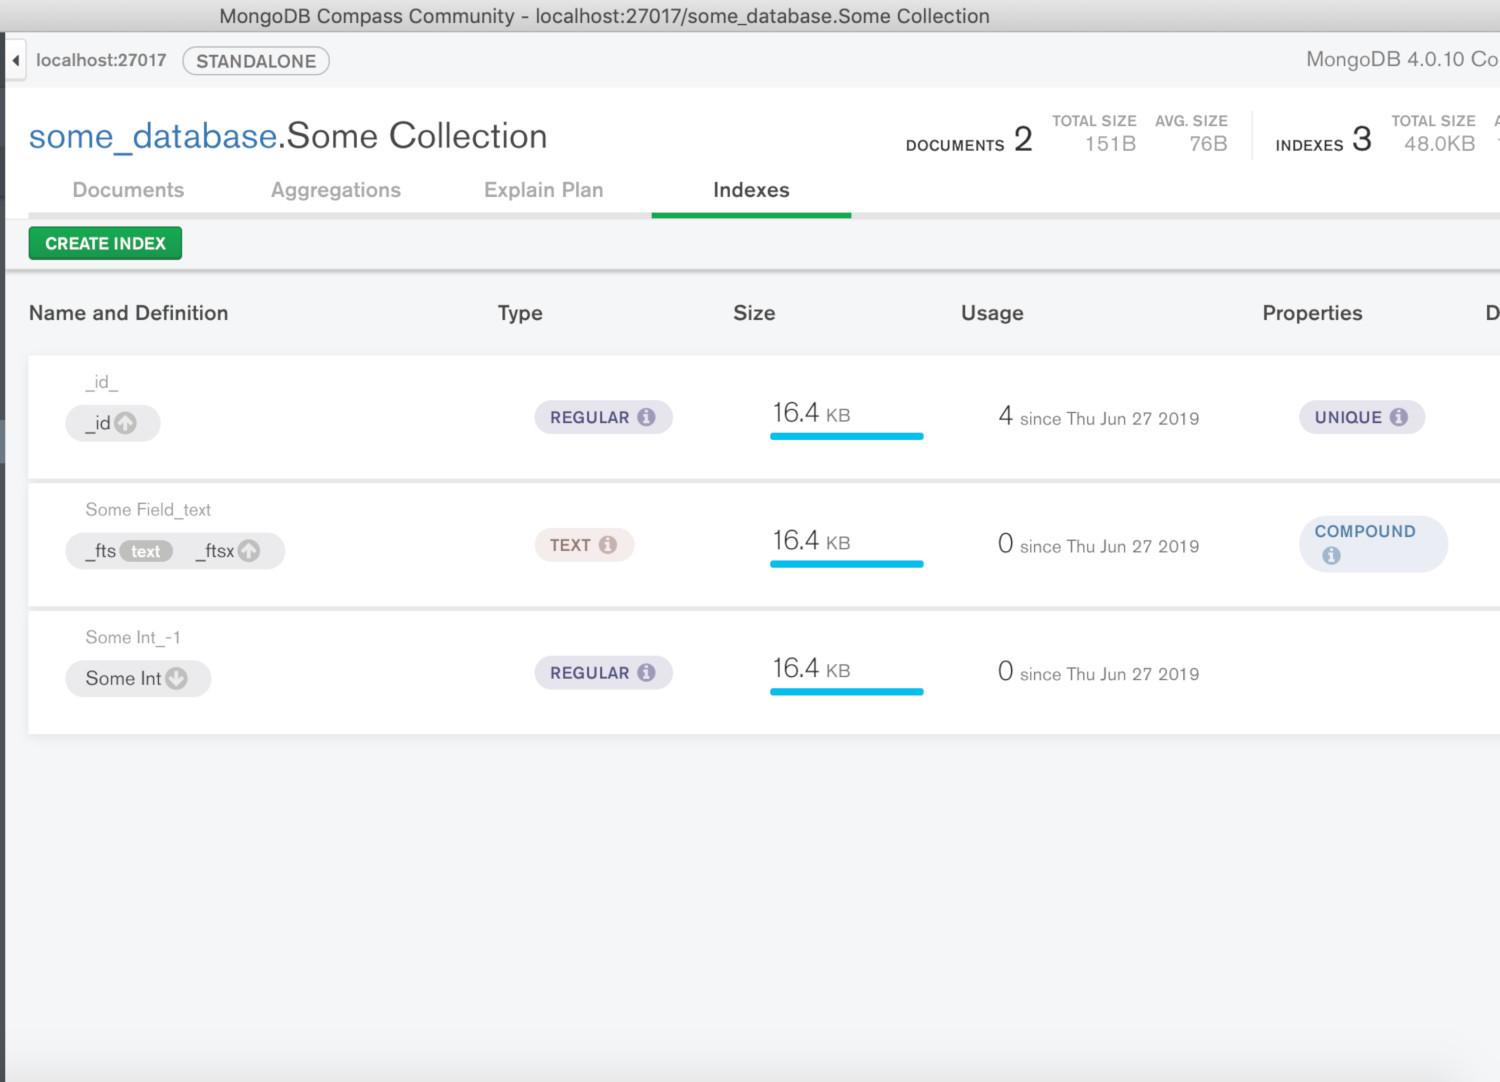 Screenshot of MongoDB Compass UI getting the indexes of a collection